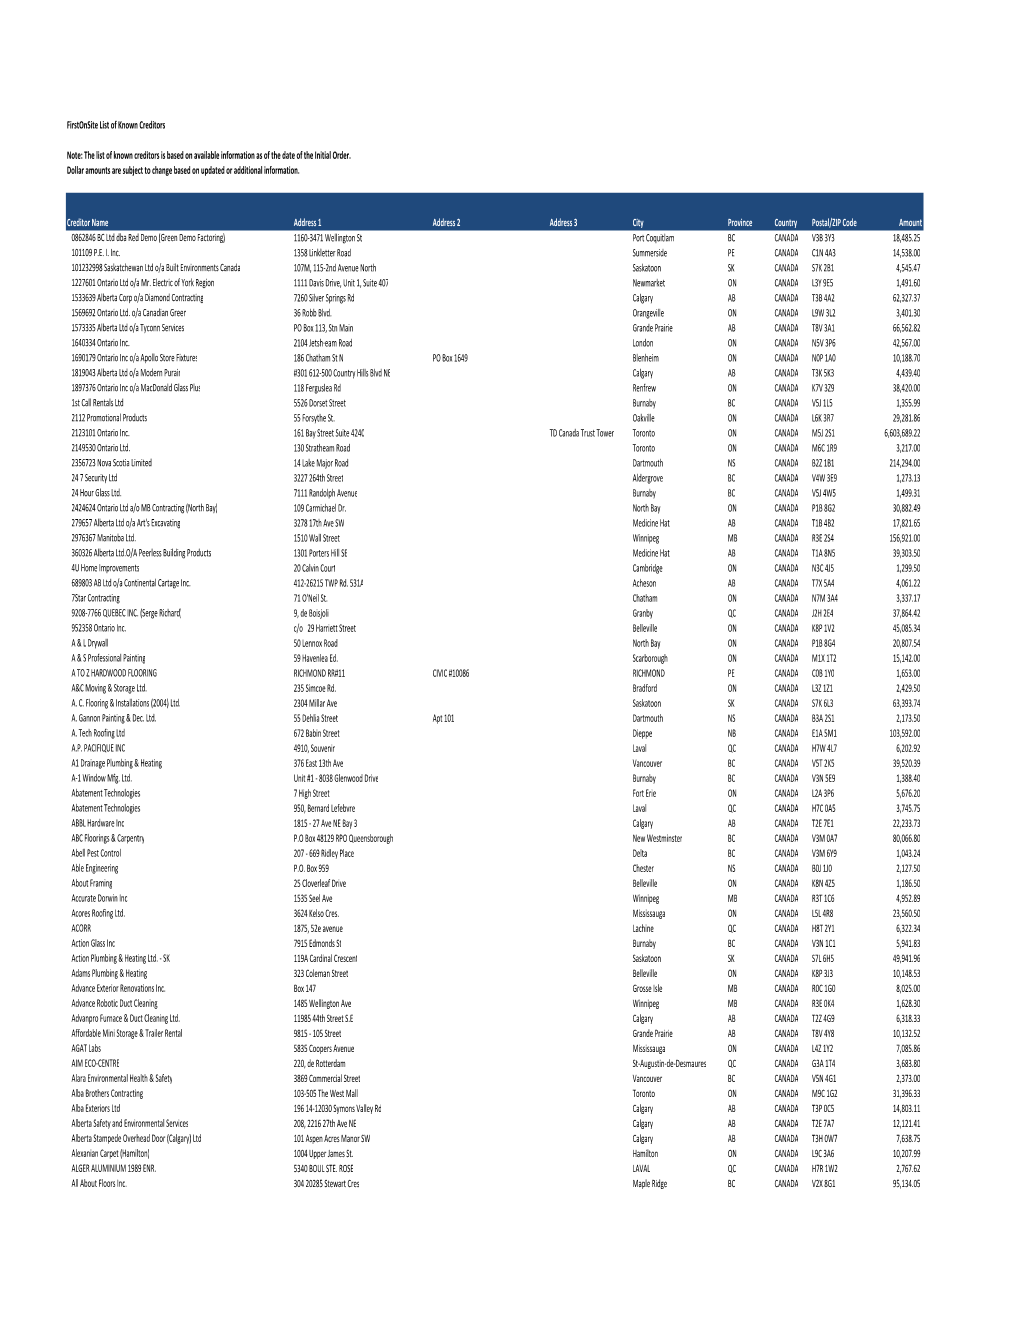 Firstonsite List of Known Creditors